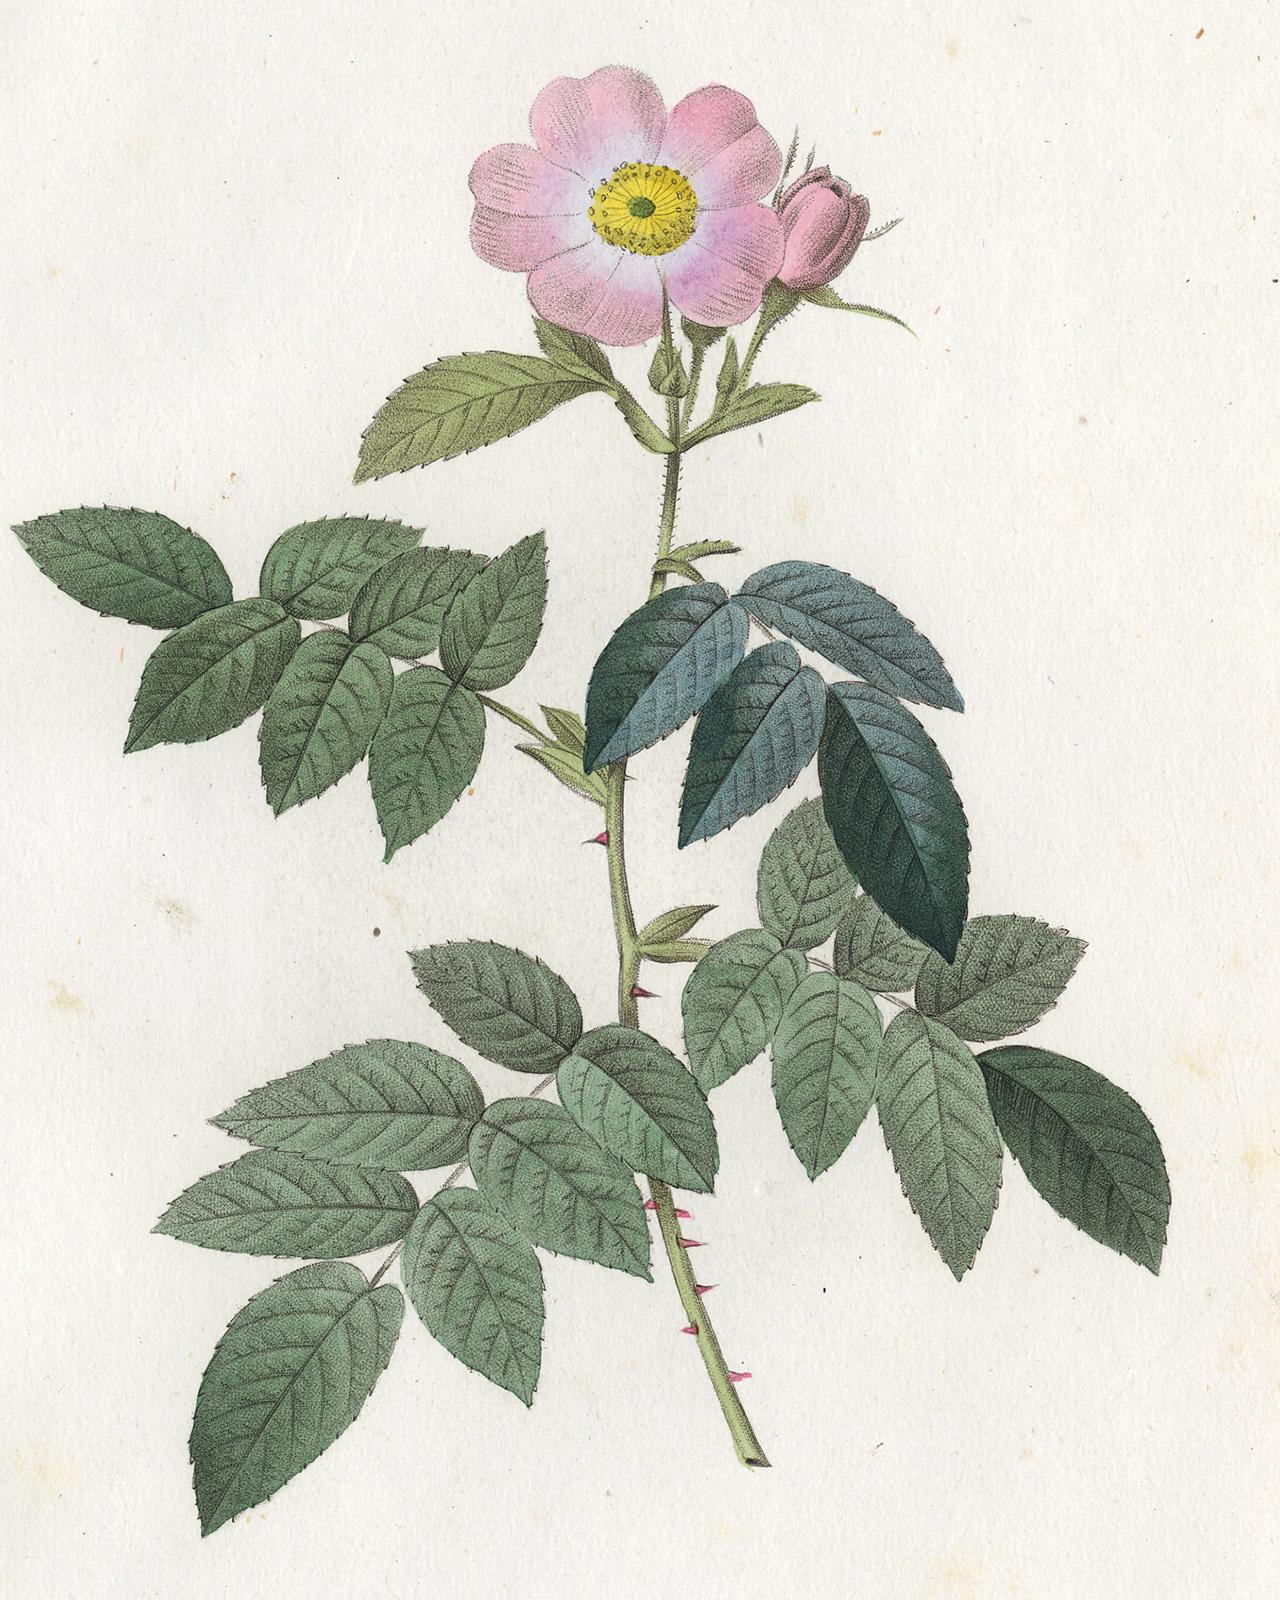 Apple Rose by Redoute - Les Roses - Handcoloured engraving - 19th century - Print by Pierre-Joseph Redouté